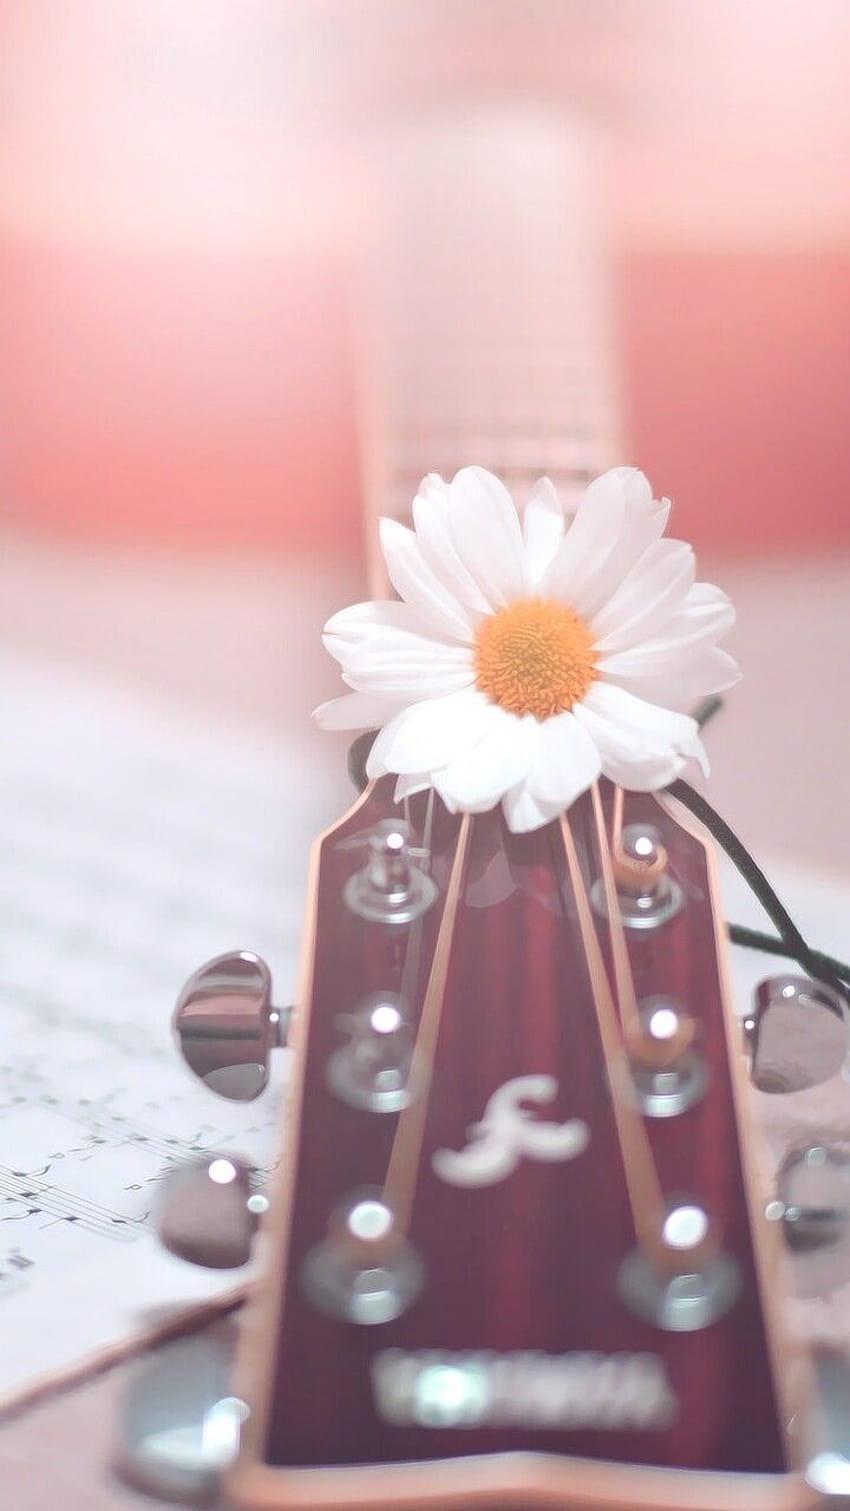 accessories, art, background, beautiful, beauty, color, colorful, decoration, fashion, fashionable, flowers, girl, girly, guitar, inspiration, kawaii, luxury, music, pastel, pink, retro, style, vintage, we heart it, white, woman, ye HD phone wallpaper